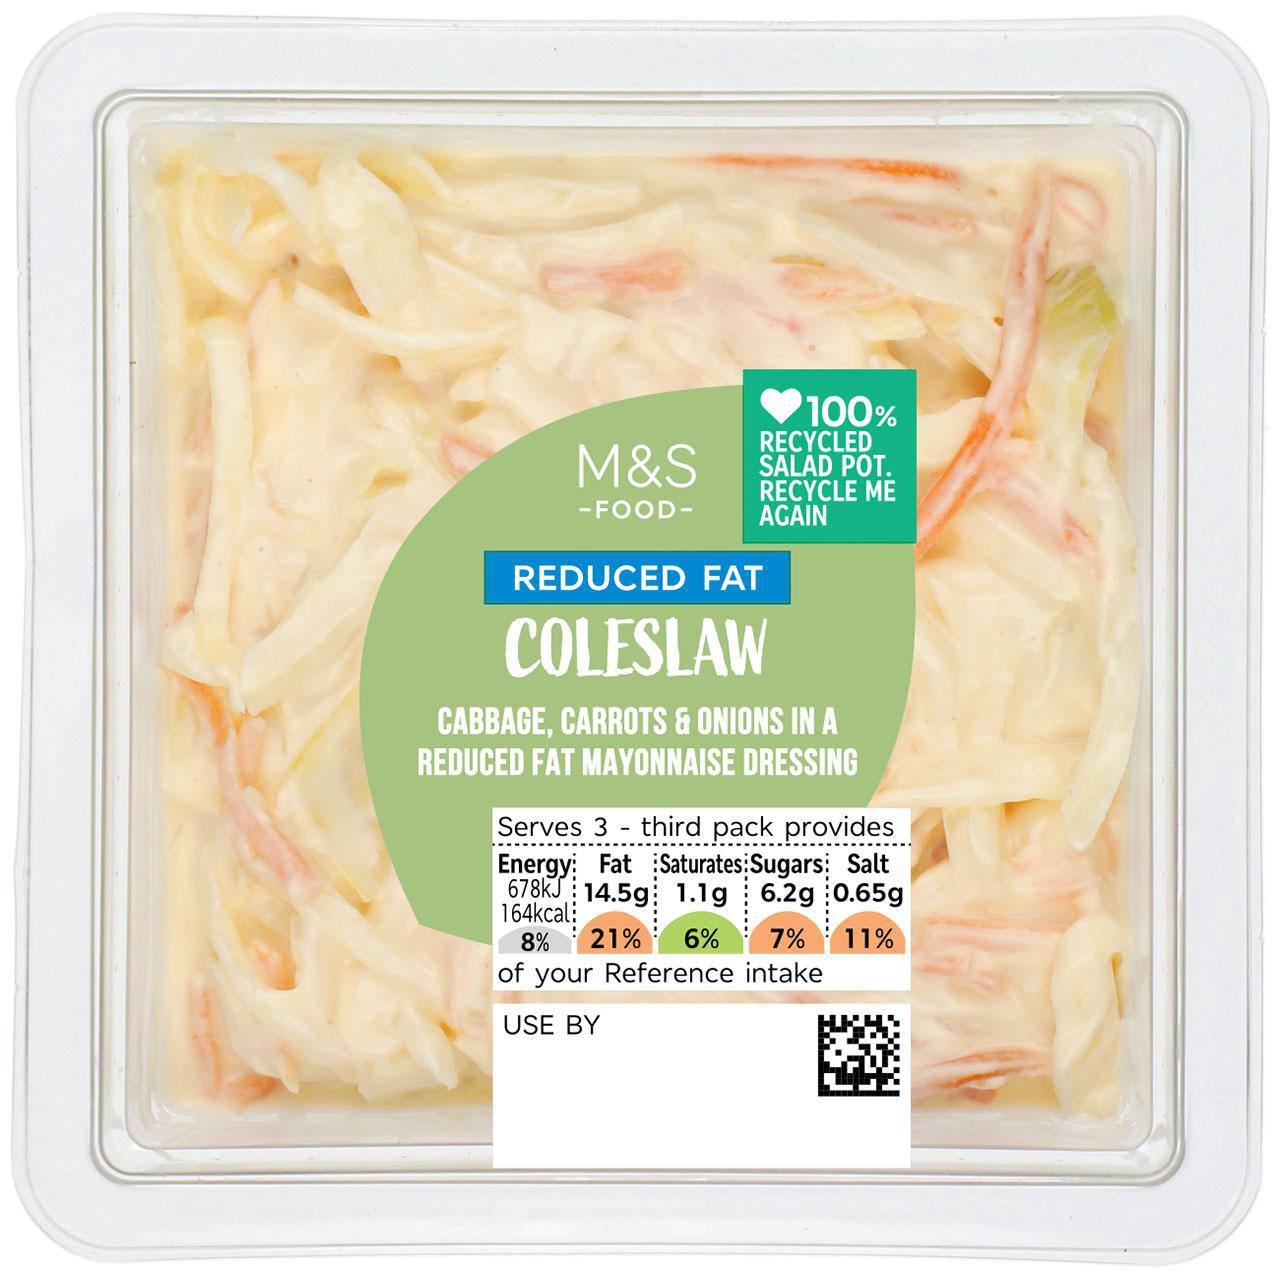 M&S Reduced Fat Traditional Coleslaw 300g